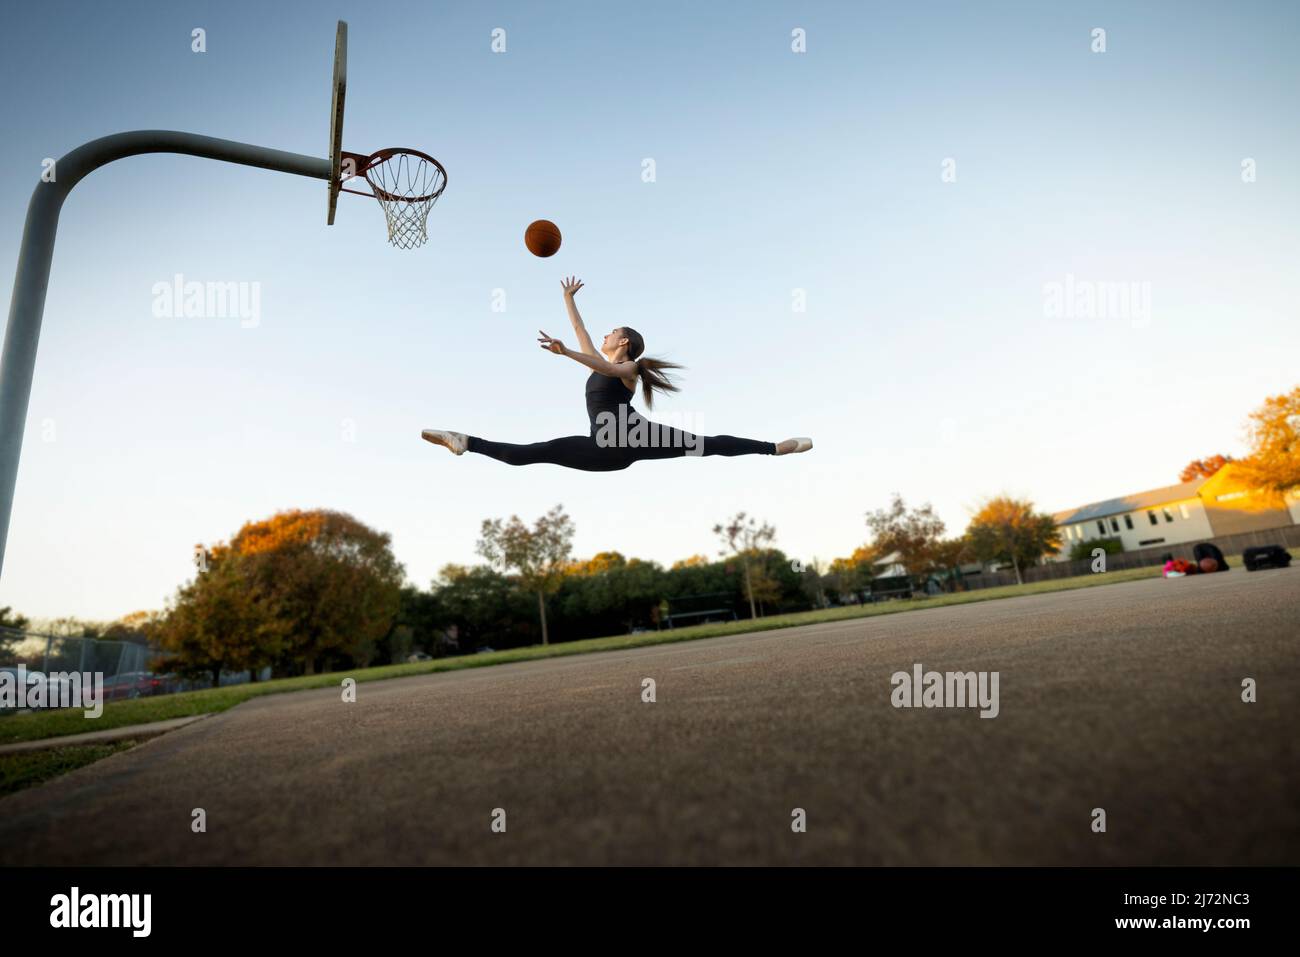 Ballet dancer playing basketball on an outdoor court Stock Photo